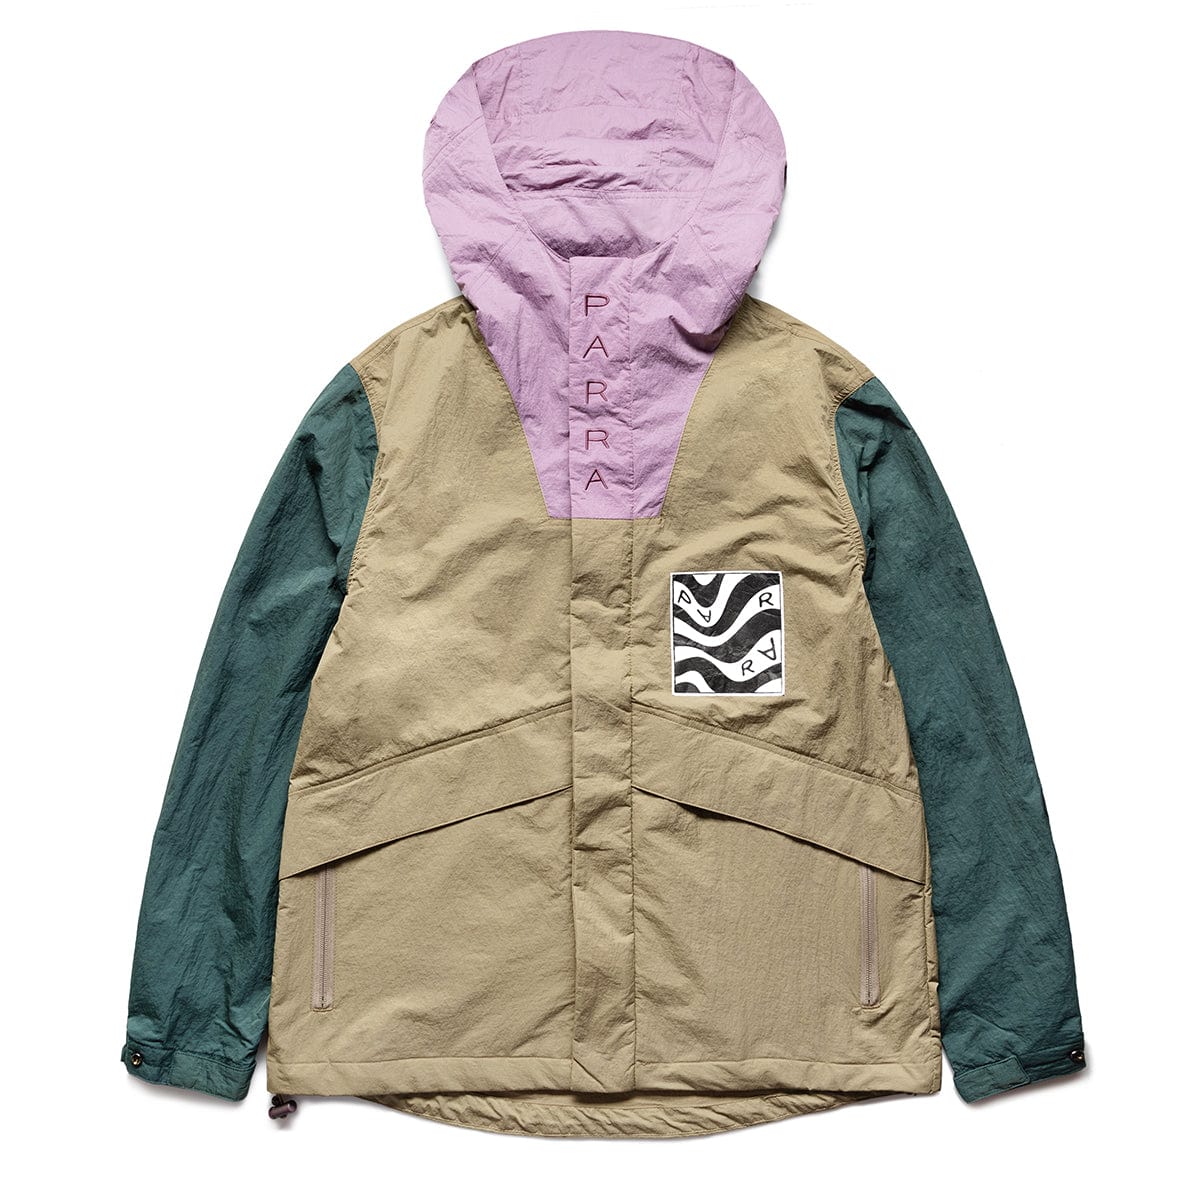 By Parra Outerwear DISTORTED LOGO JACKET